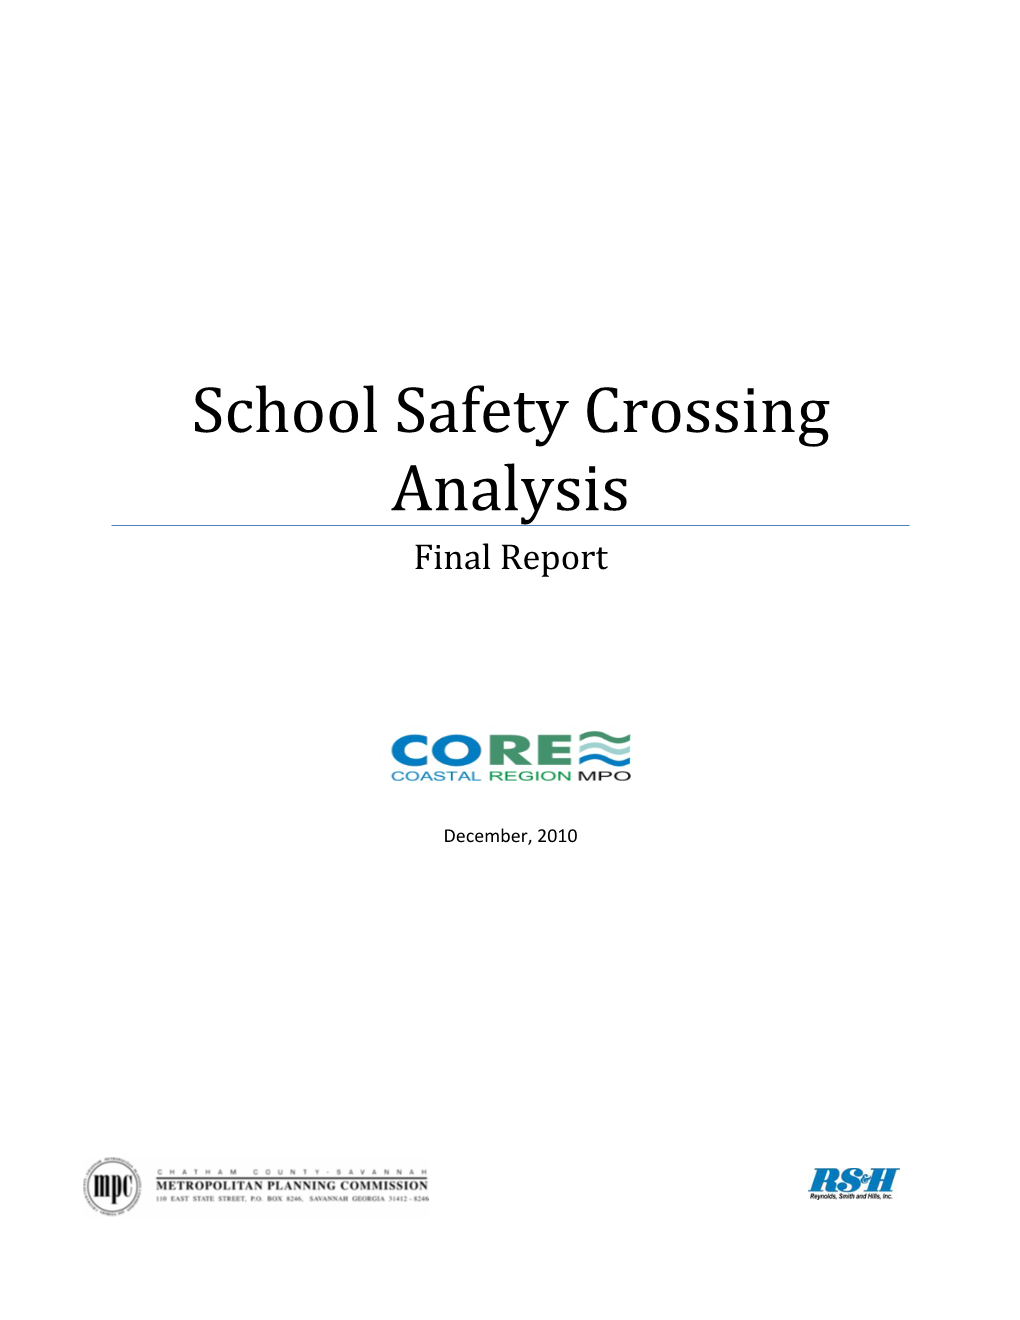 School Safety Crossing Analysis Final Report